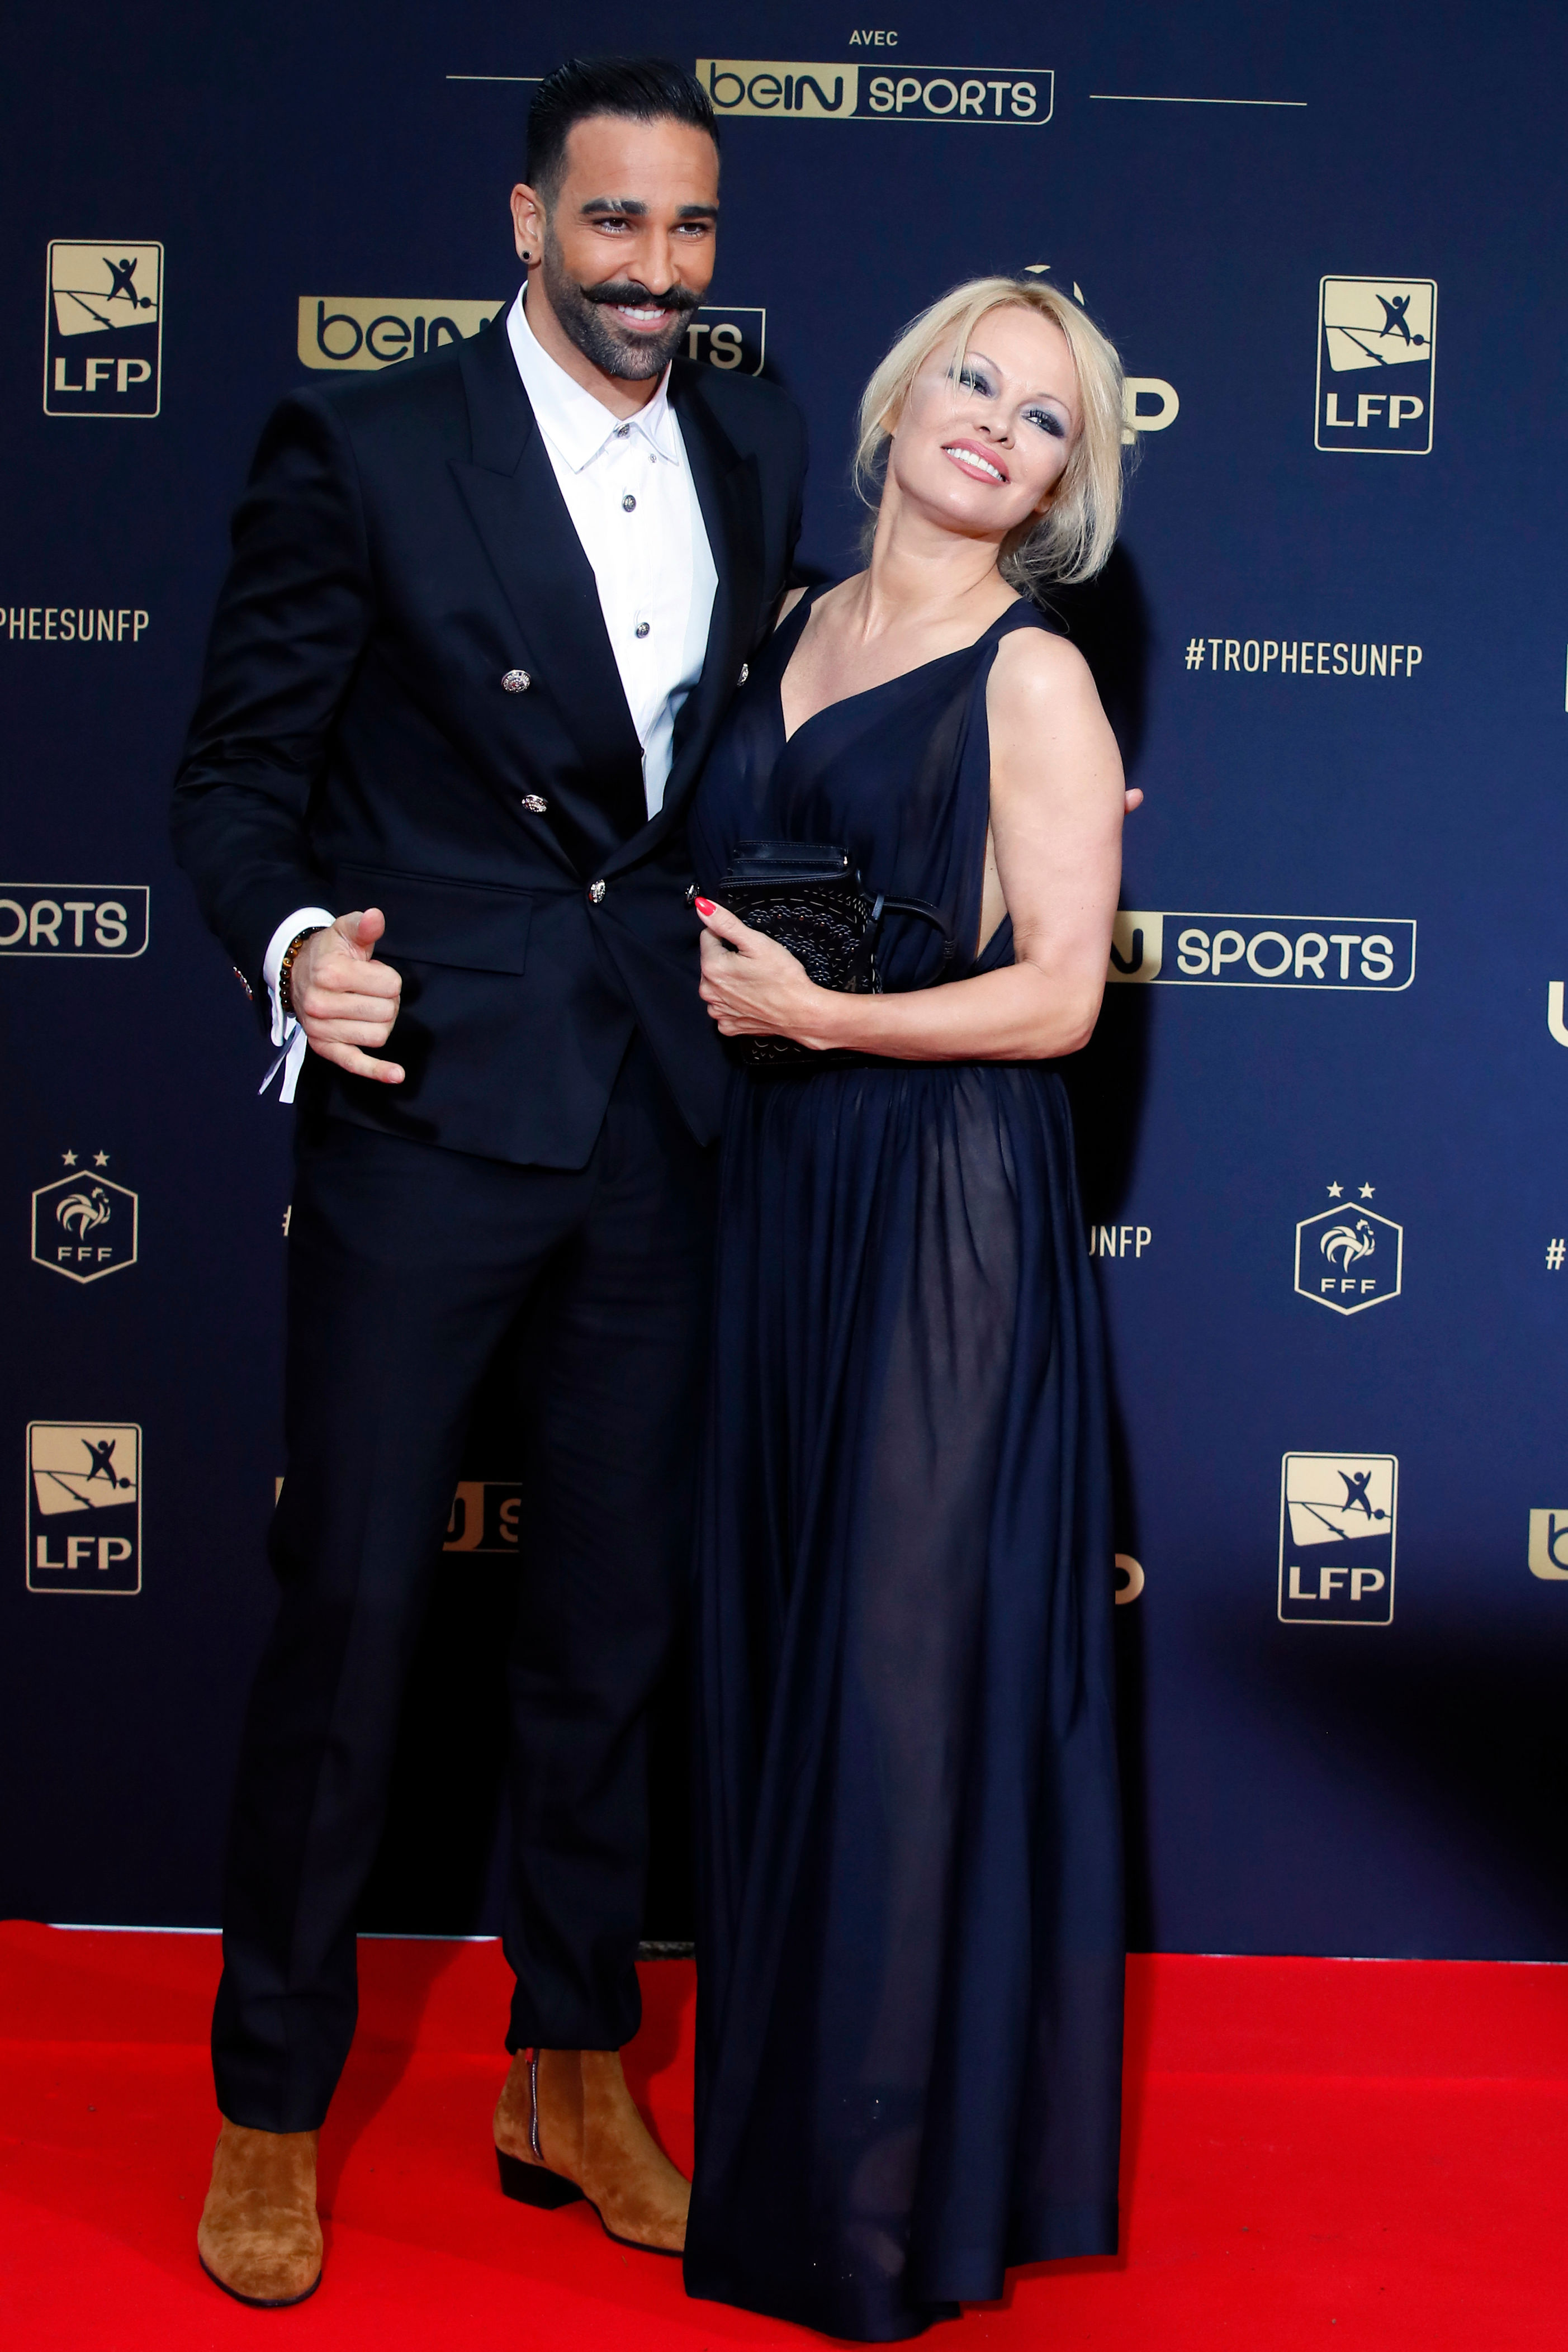 <p><span>In mid-2019, <a href="https://www.wonderwall.com/celebrity/profiles/overview/pamela-anderson-369.article">Pamela Anderson</a> accused her off-and-on boyfriend of more than two years, soccer star Adil Rami, of </span><a href="https://www.wonderwall.com/news/pamela-anderson-accuses-soccer-star-adil-rami-cheating-abuse-living-double-life-3020131.article">domestic violence</a><span> and of </span><a href="https://www.wonderwall.com/celebrity/couples/camila-cabello-shawn-mendes-dating-celeb-love-life-news-late-june-2019-hollywood-romance-report-3020161.gallery?photoId=1057747">cheating</a><span> on her with French model Sidonie Biemont -- with whom he shares young twin sons. Later, the French athlete denied the abuse allegations but admitted that he was seeing both women at the same time, writing that he "should have been more transparent in this ambiguous relationship."</span></p>